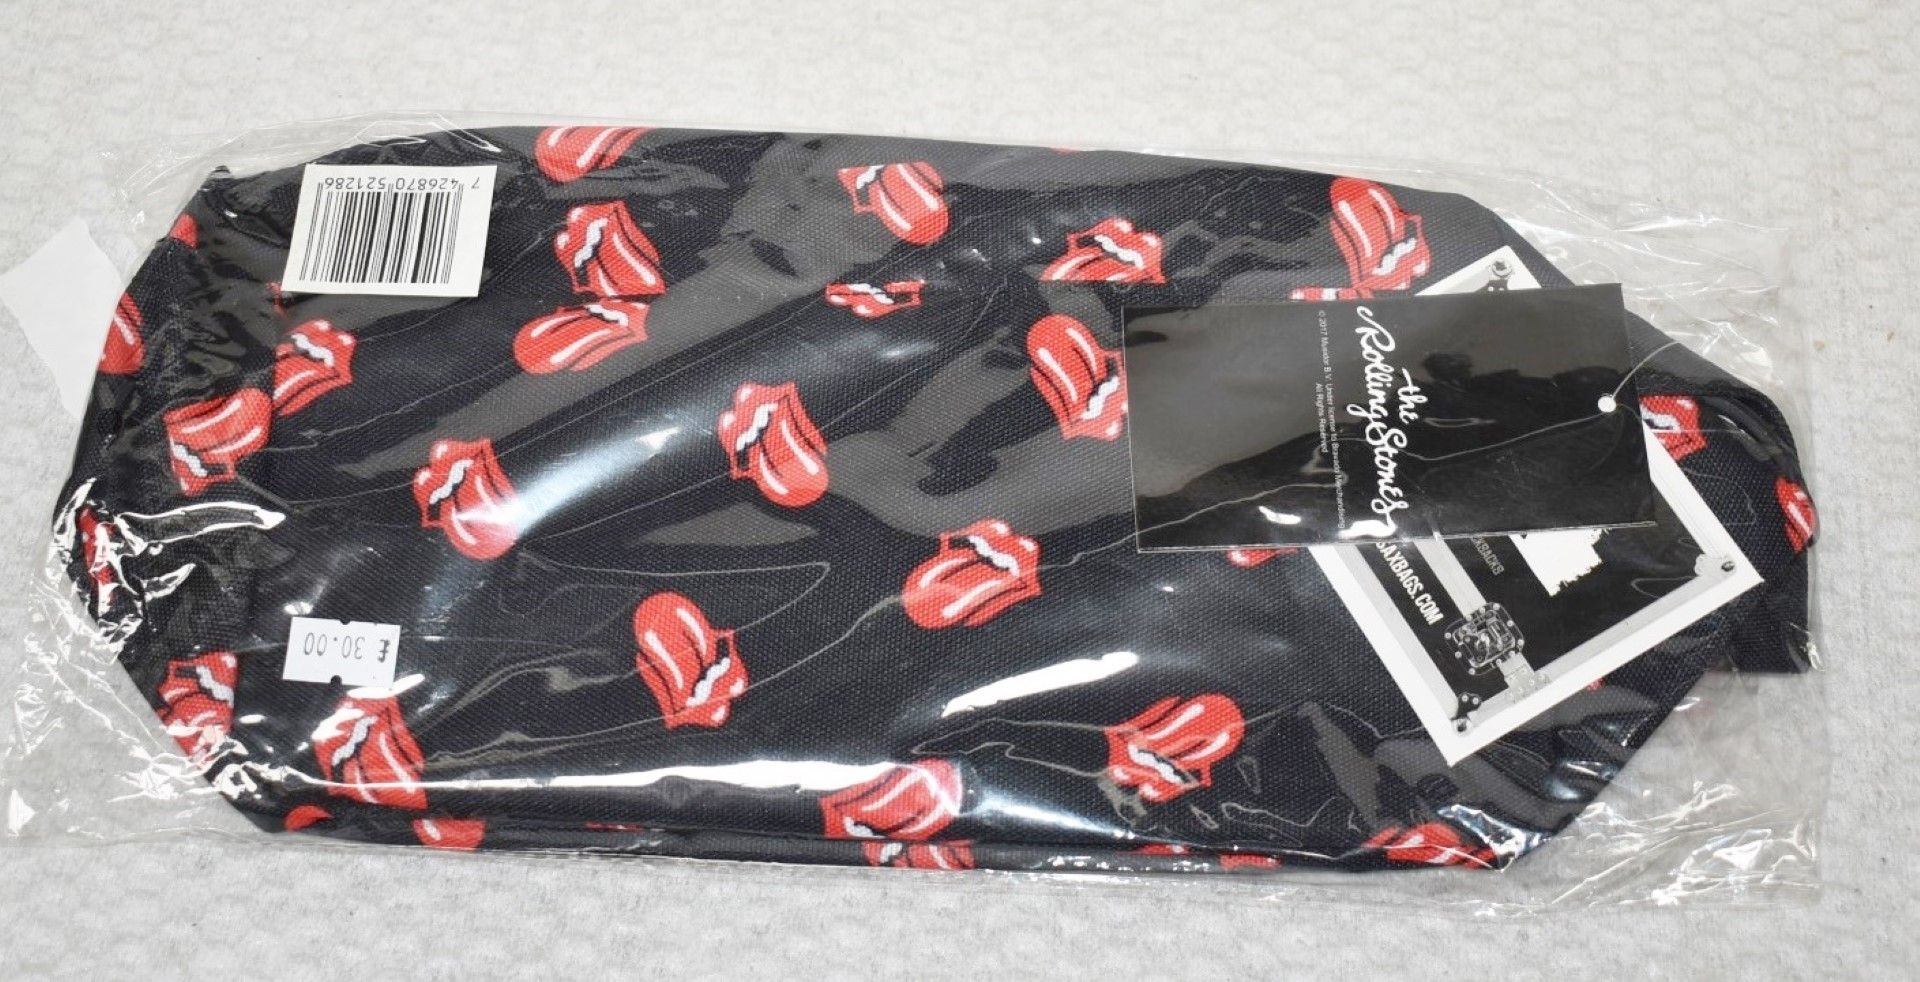 1 x Rolling Stones Travellers Wash Bag by Rock Sax - Iconic Tongue and Lips Logo - Officially - Image 4 of 6